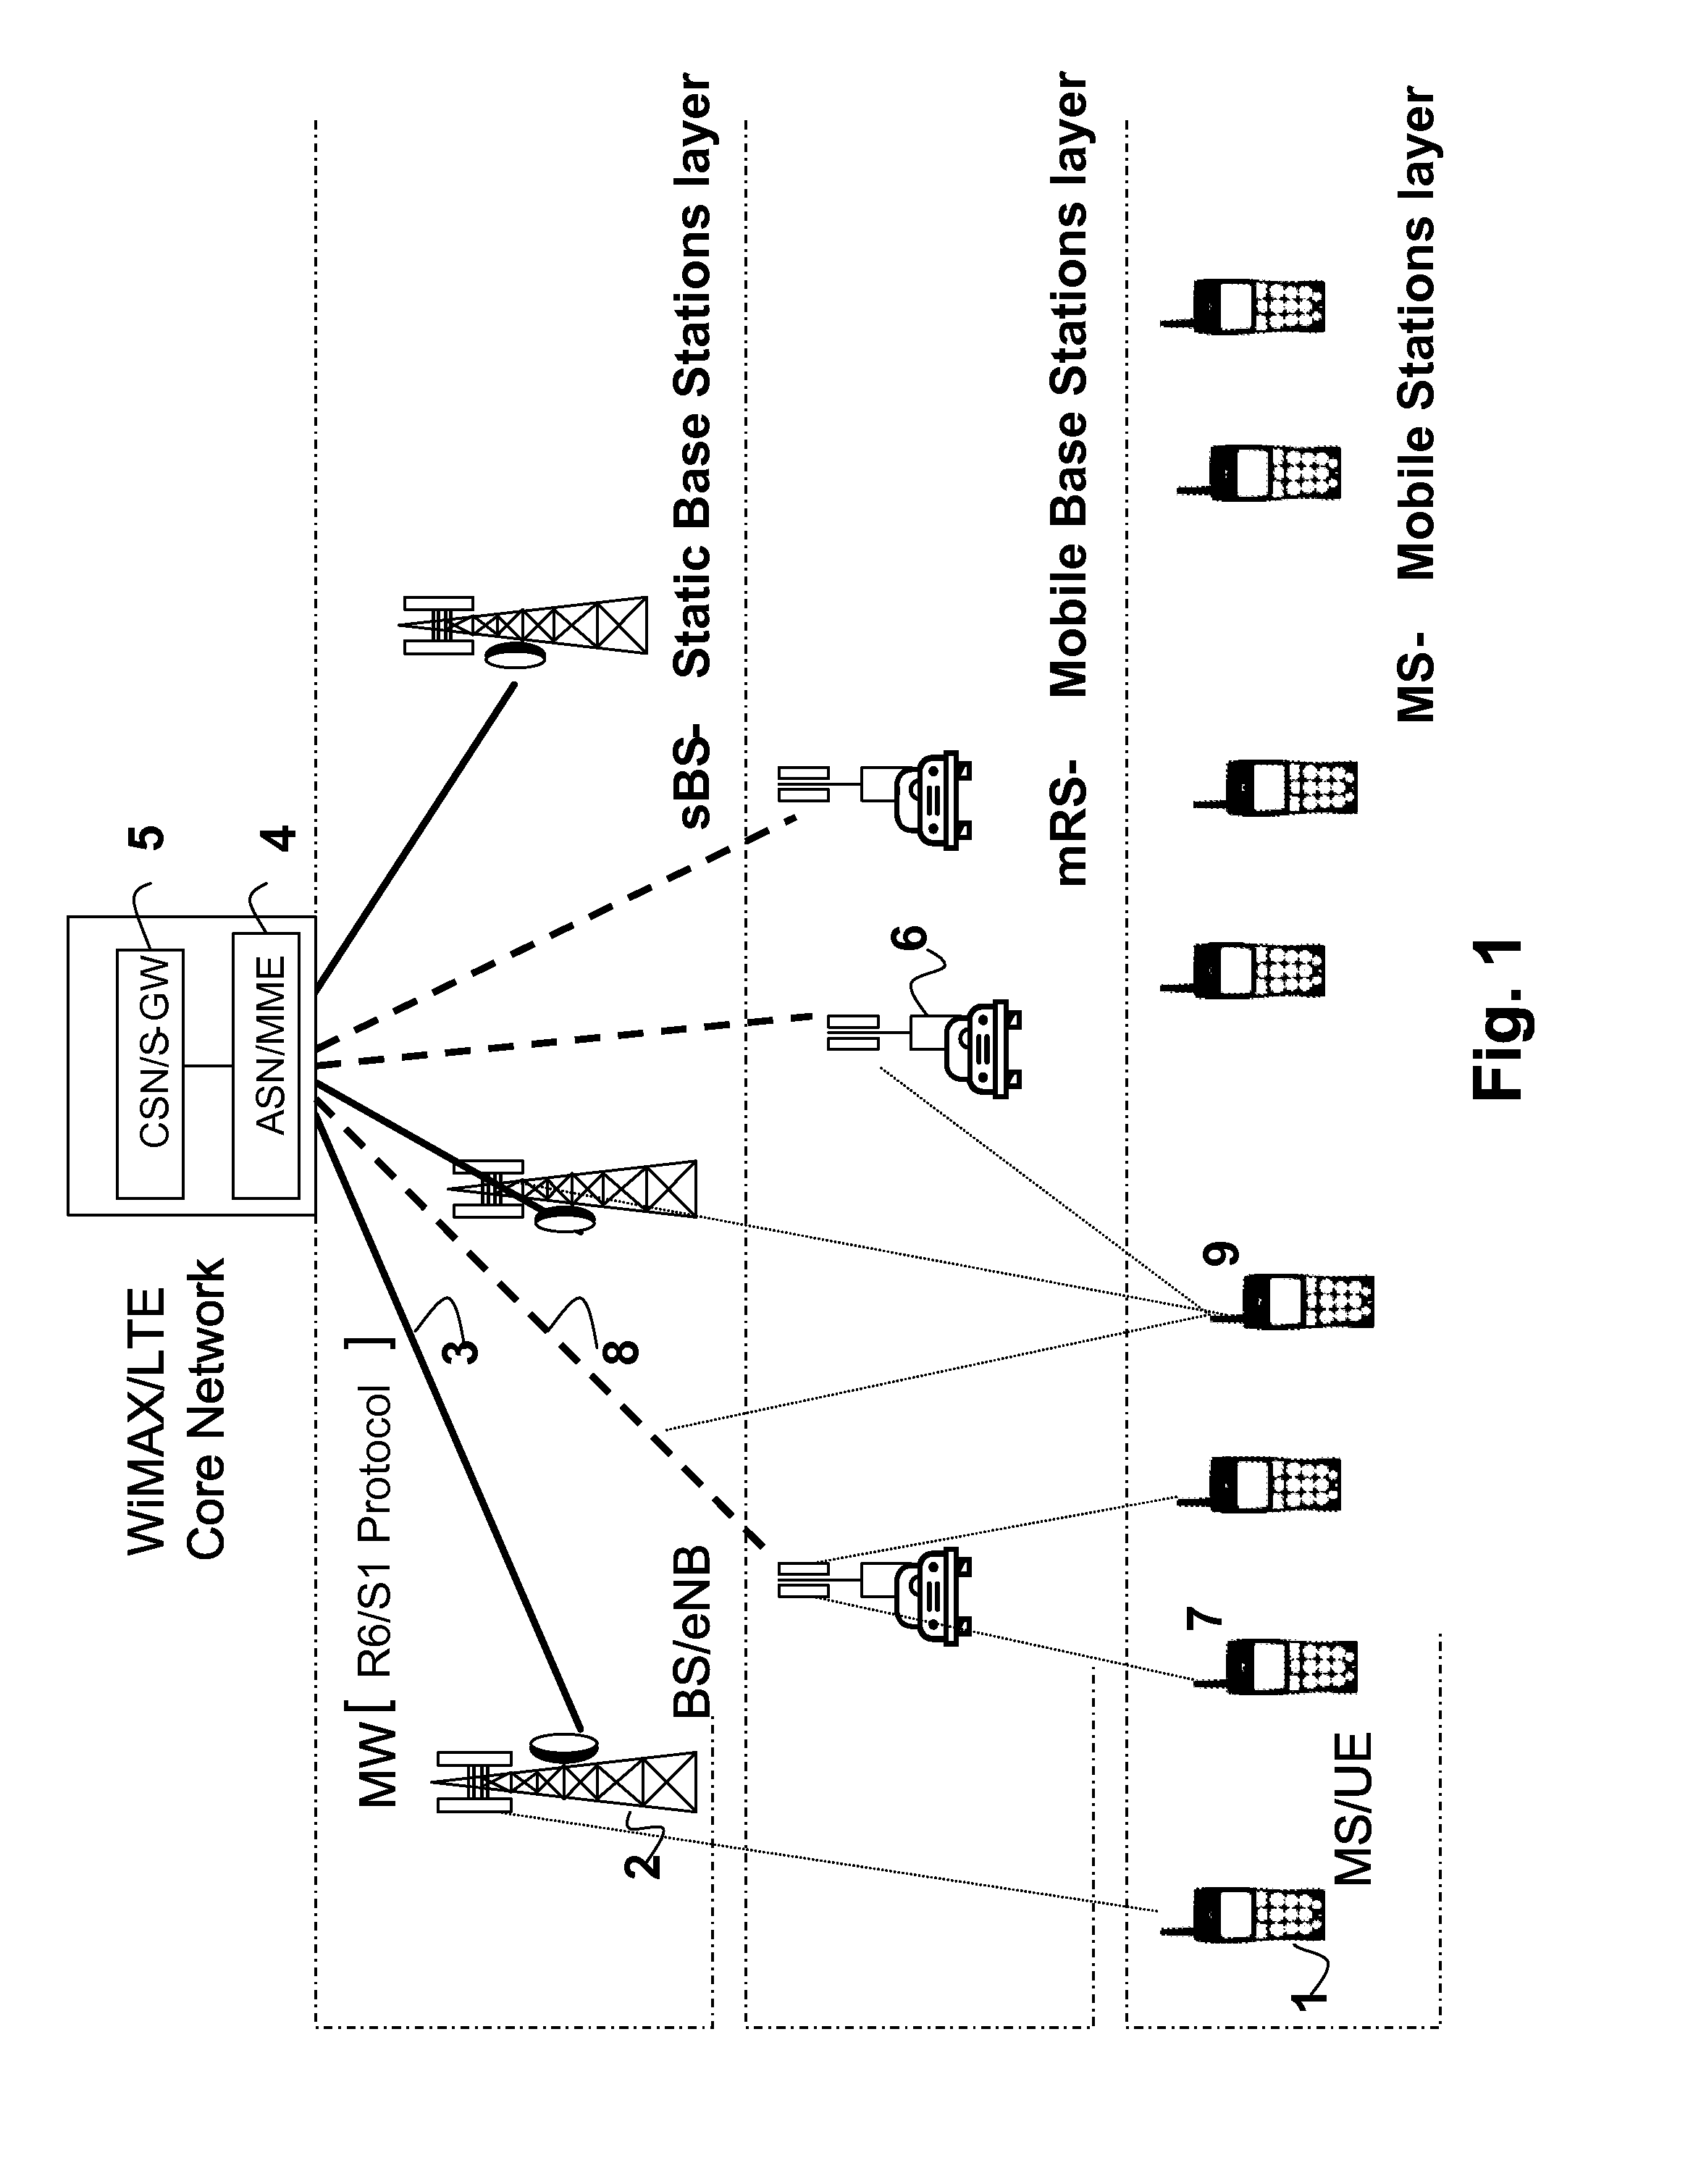 Moving cellular communication system operative in an emergency mode